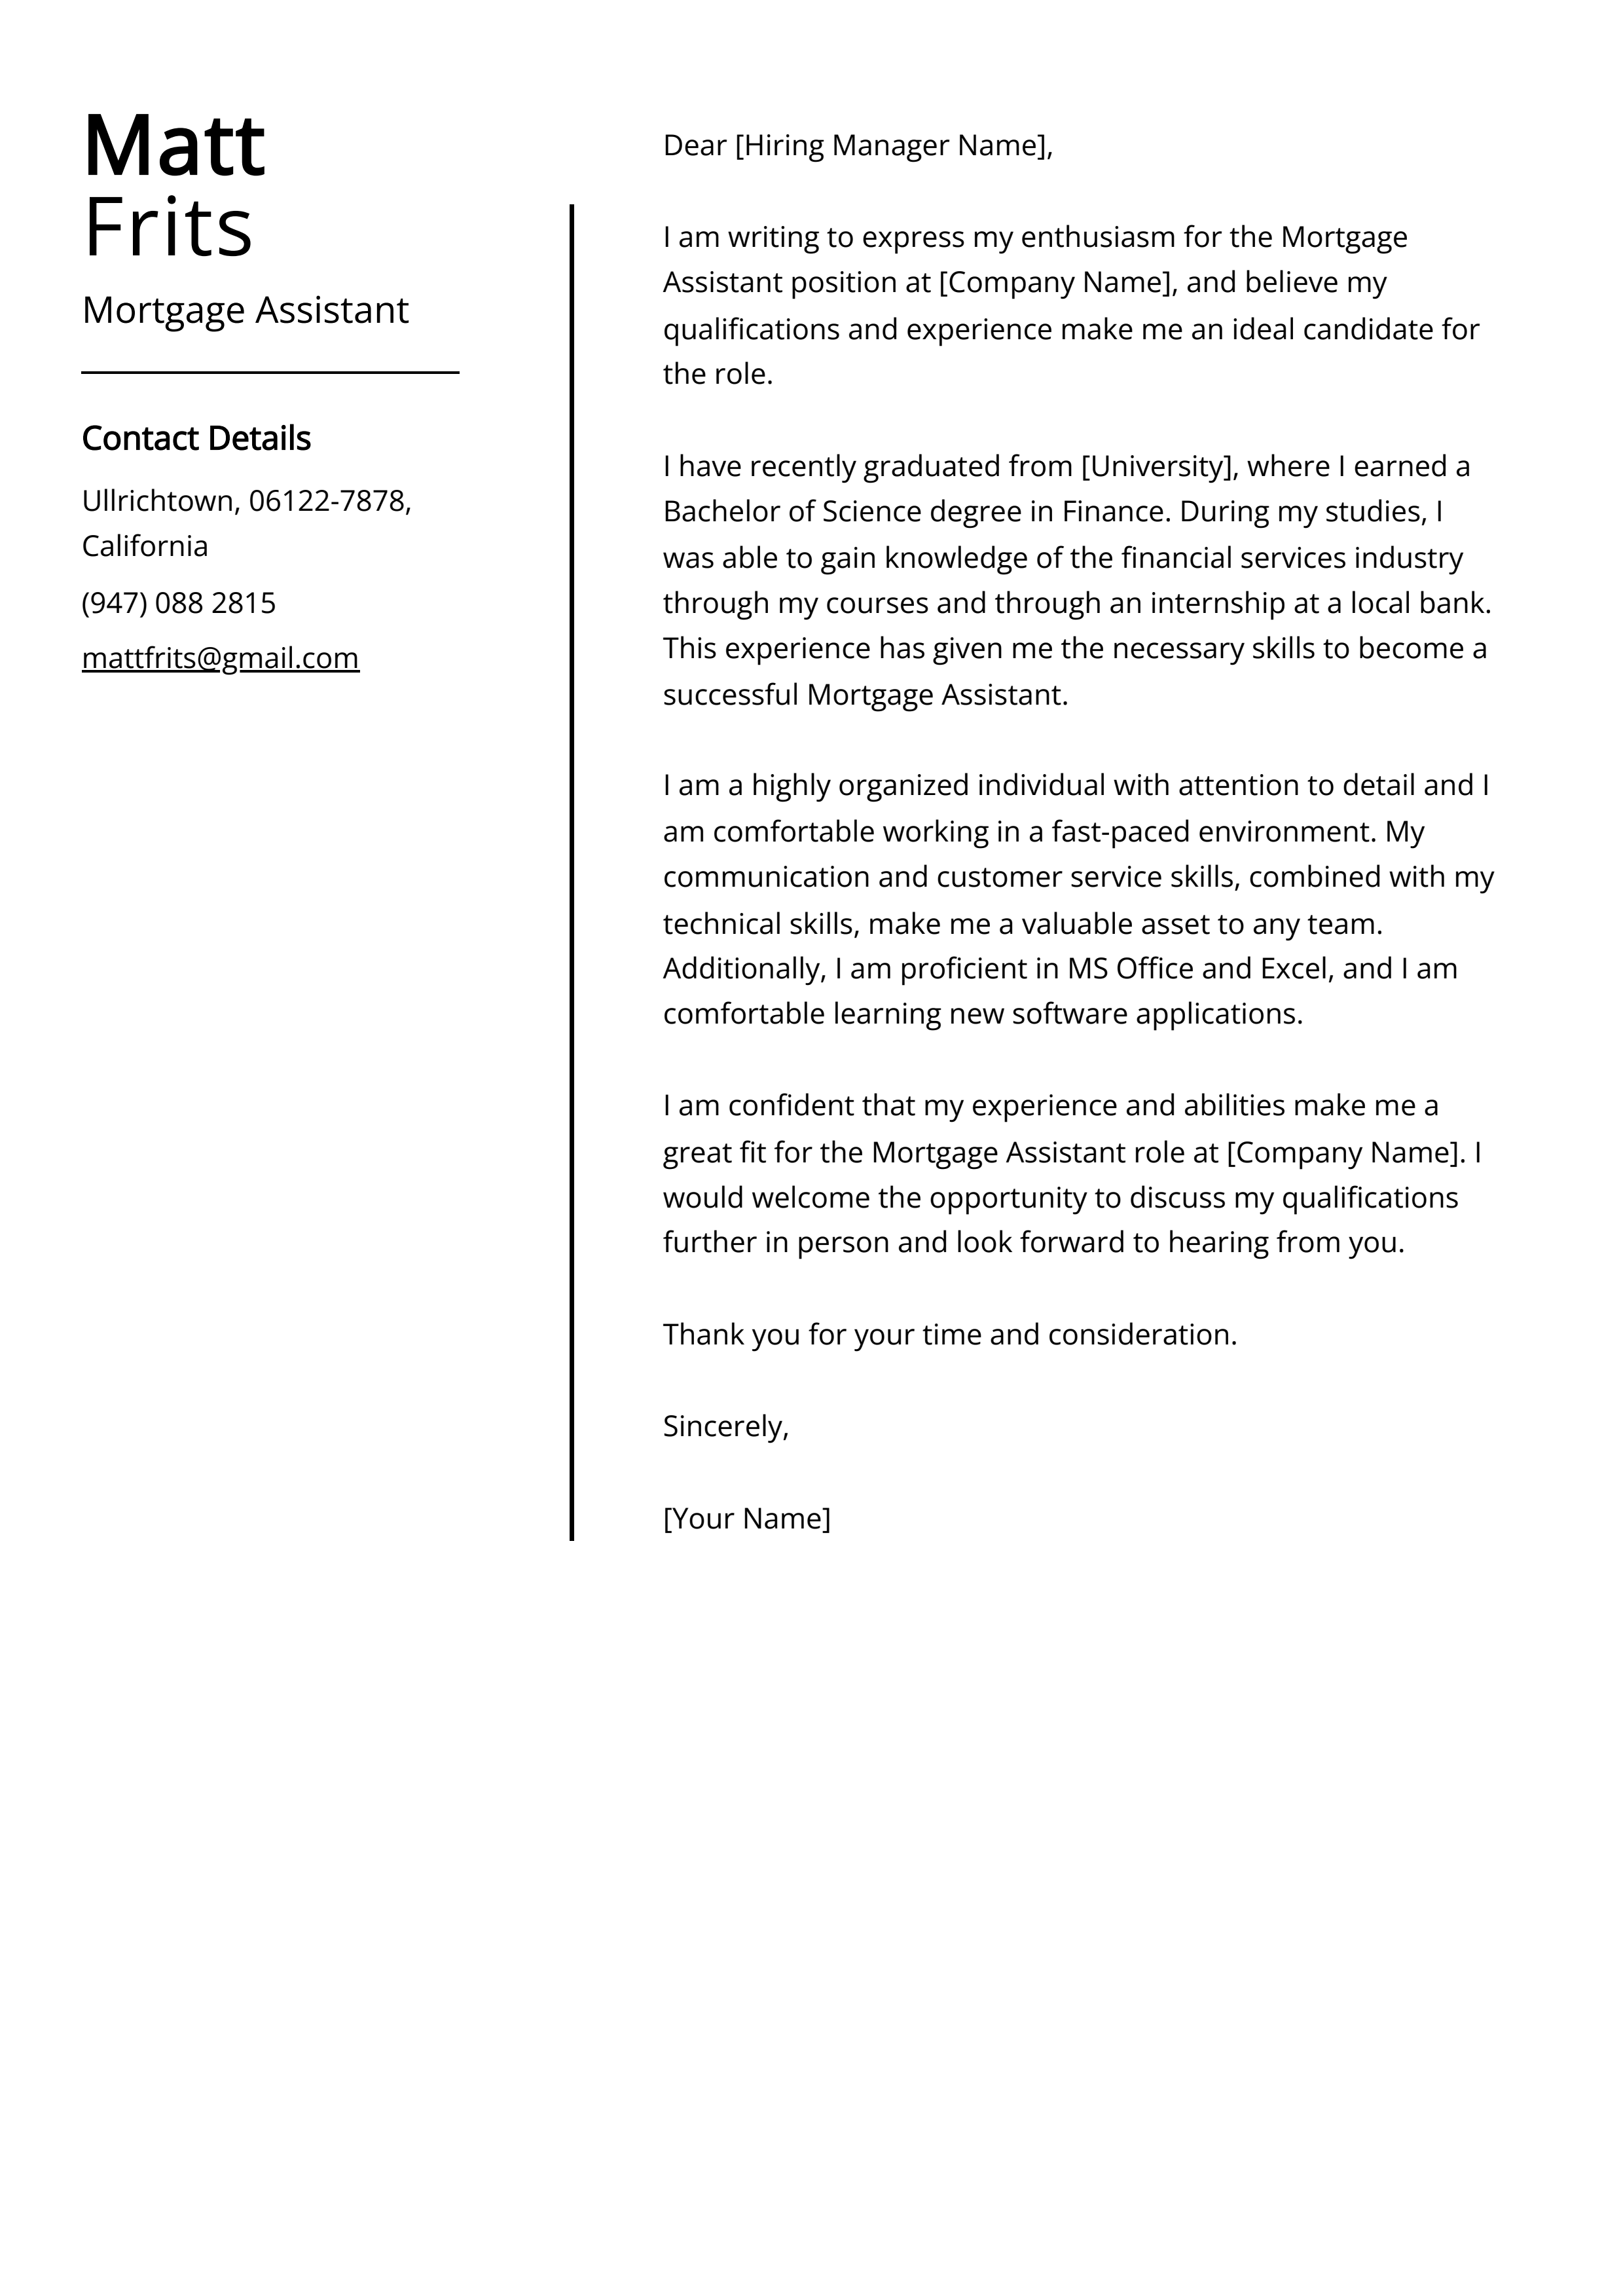 Mortgage Assistant Cover Letter Example